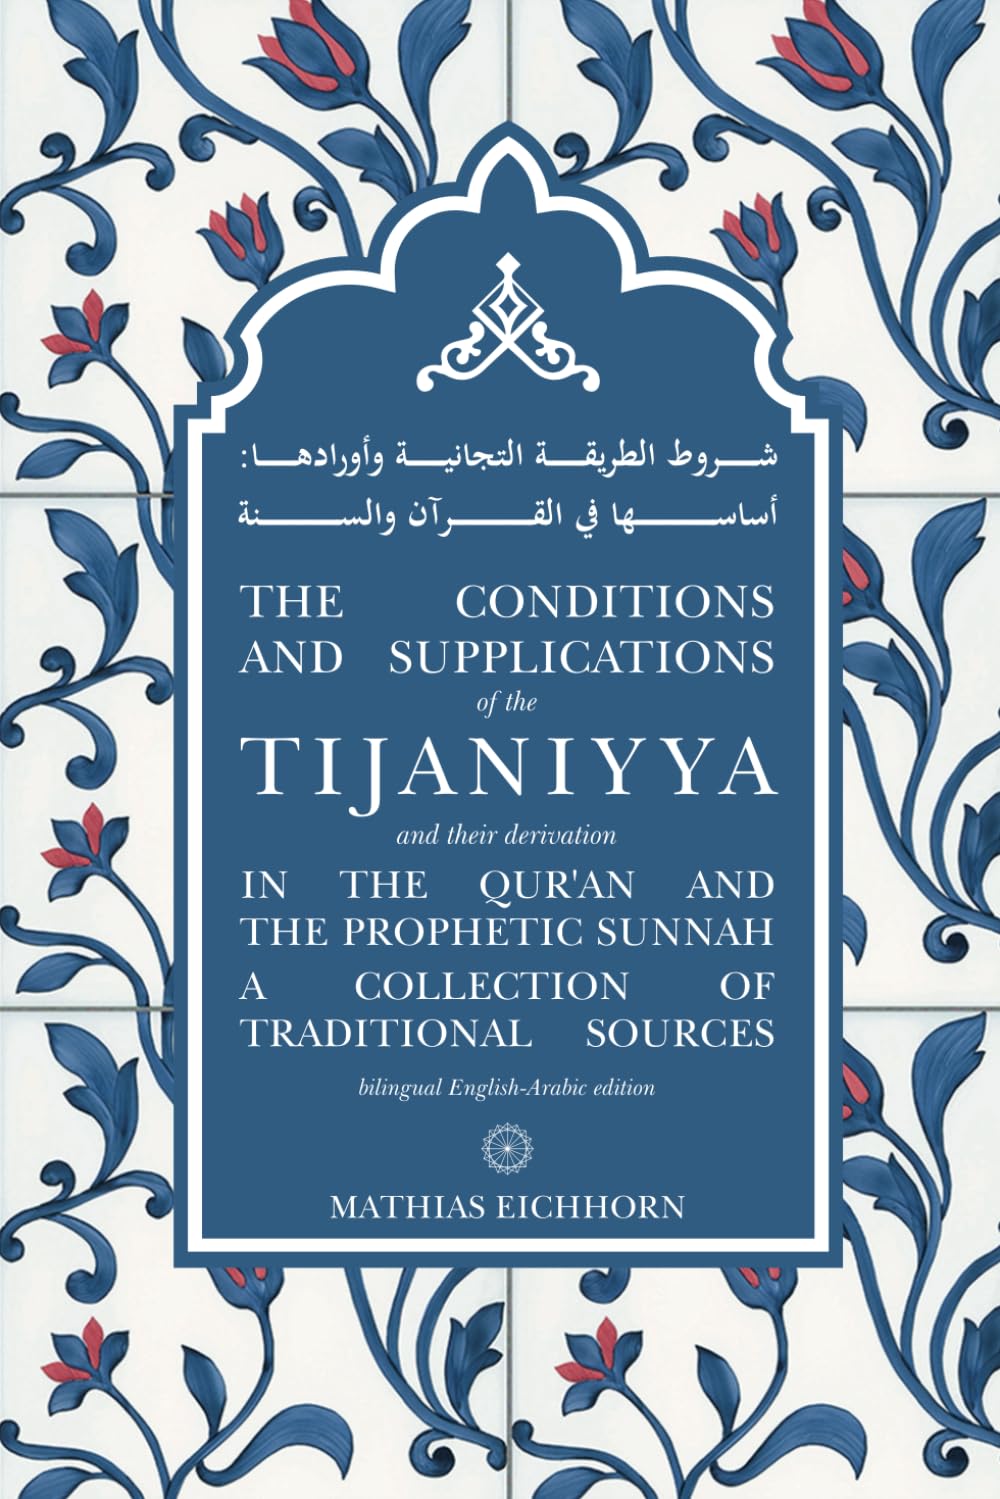 The Conditions and Supplications of the Tijaniyya, and their Derivation in the Qur’an and the Prophetic Sunnah: a Collection of Traditional Sources